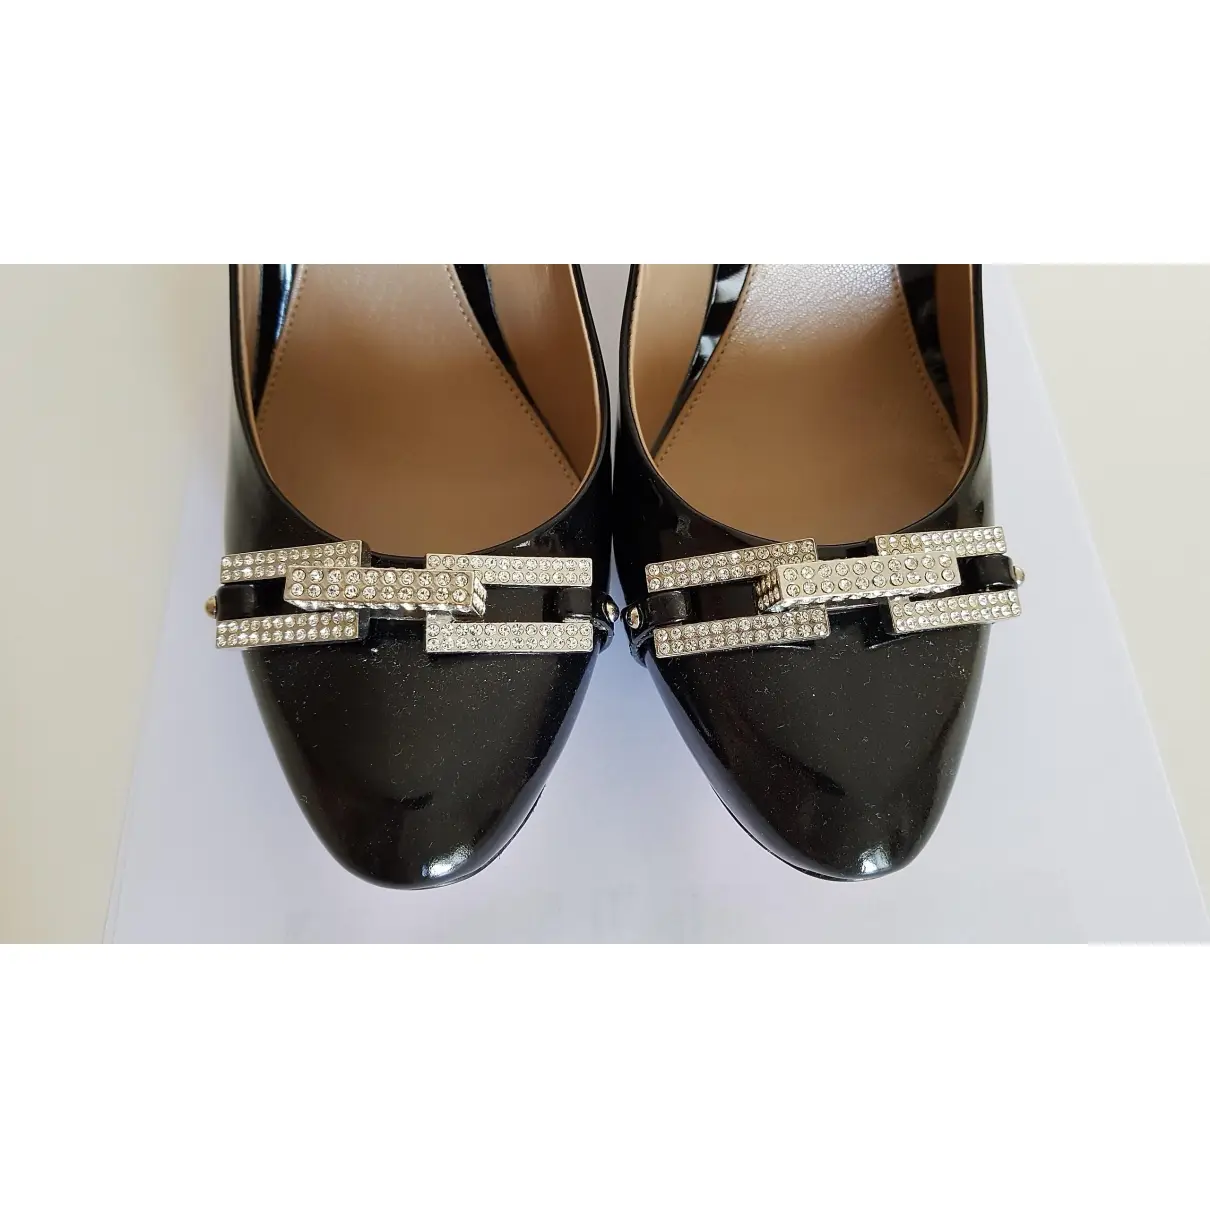 Patent leather heels MARIO BOLOGNA